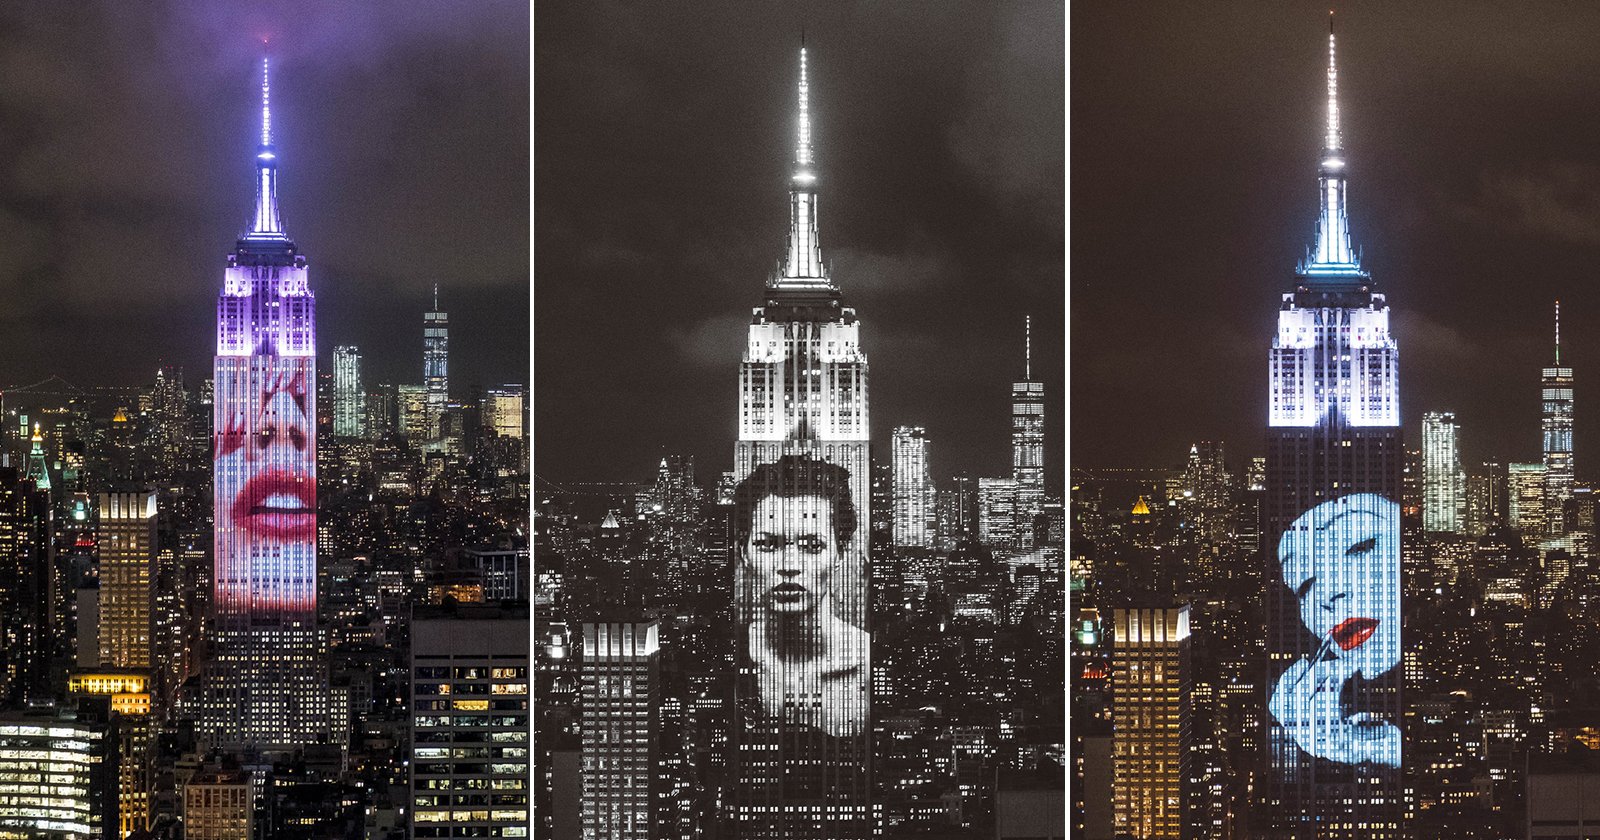 Harpers Projected 150 Iconic Fashion Photos Onto the Empire State Building